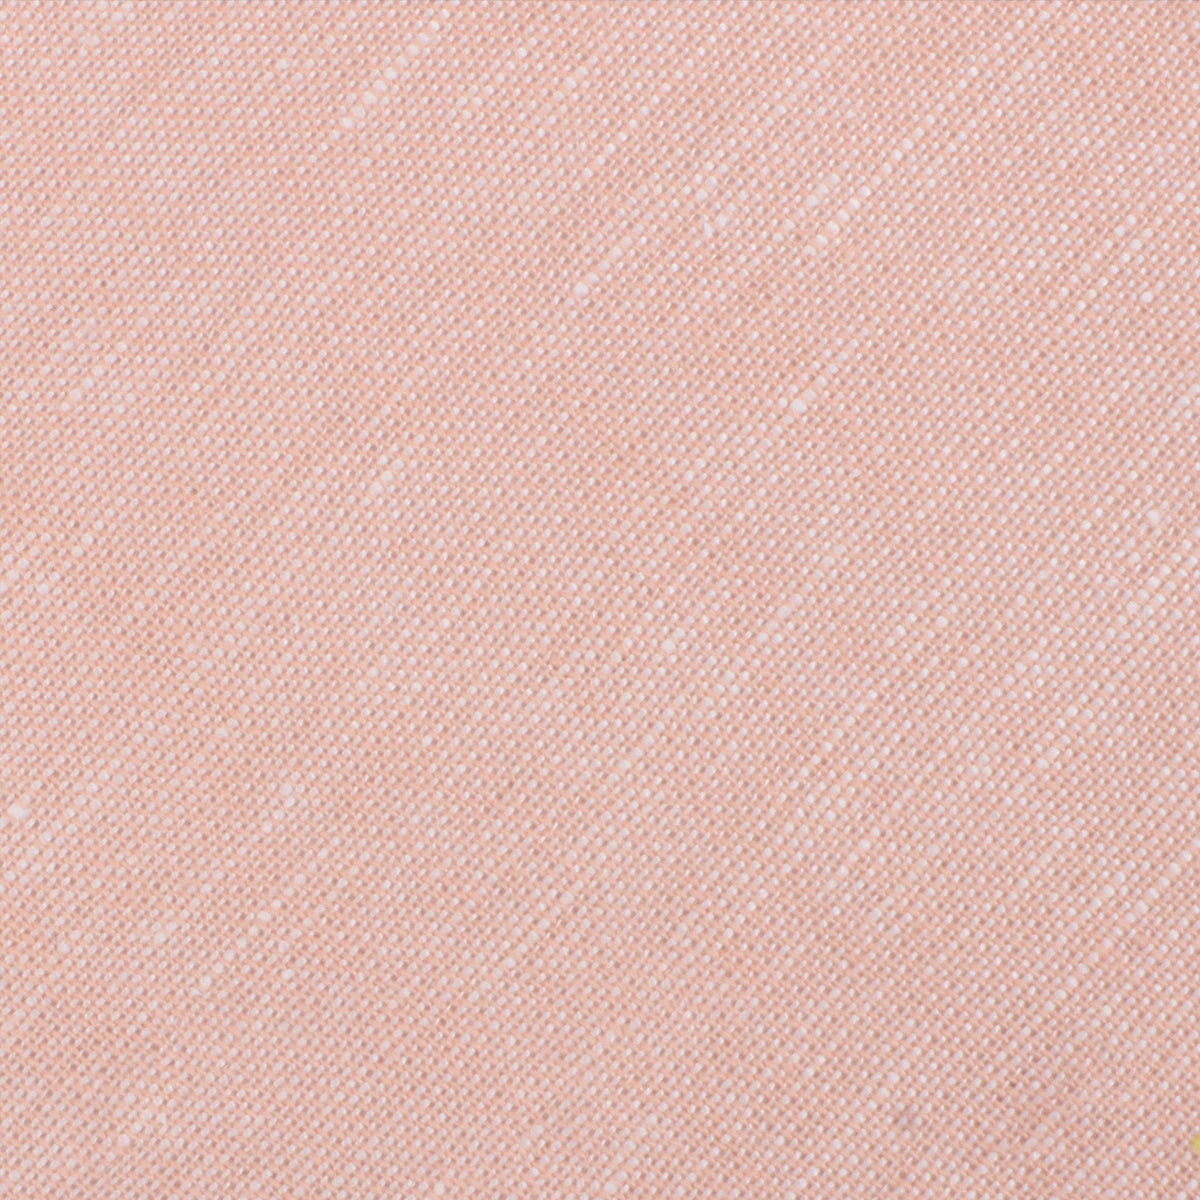 Ballet Blush Pink Chambray Linen Bow Tie Fabric